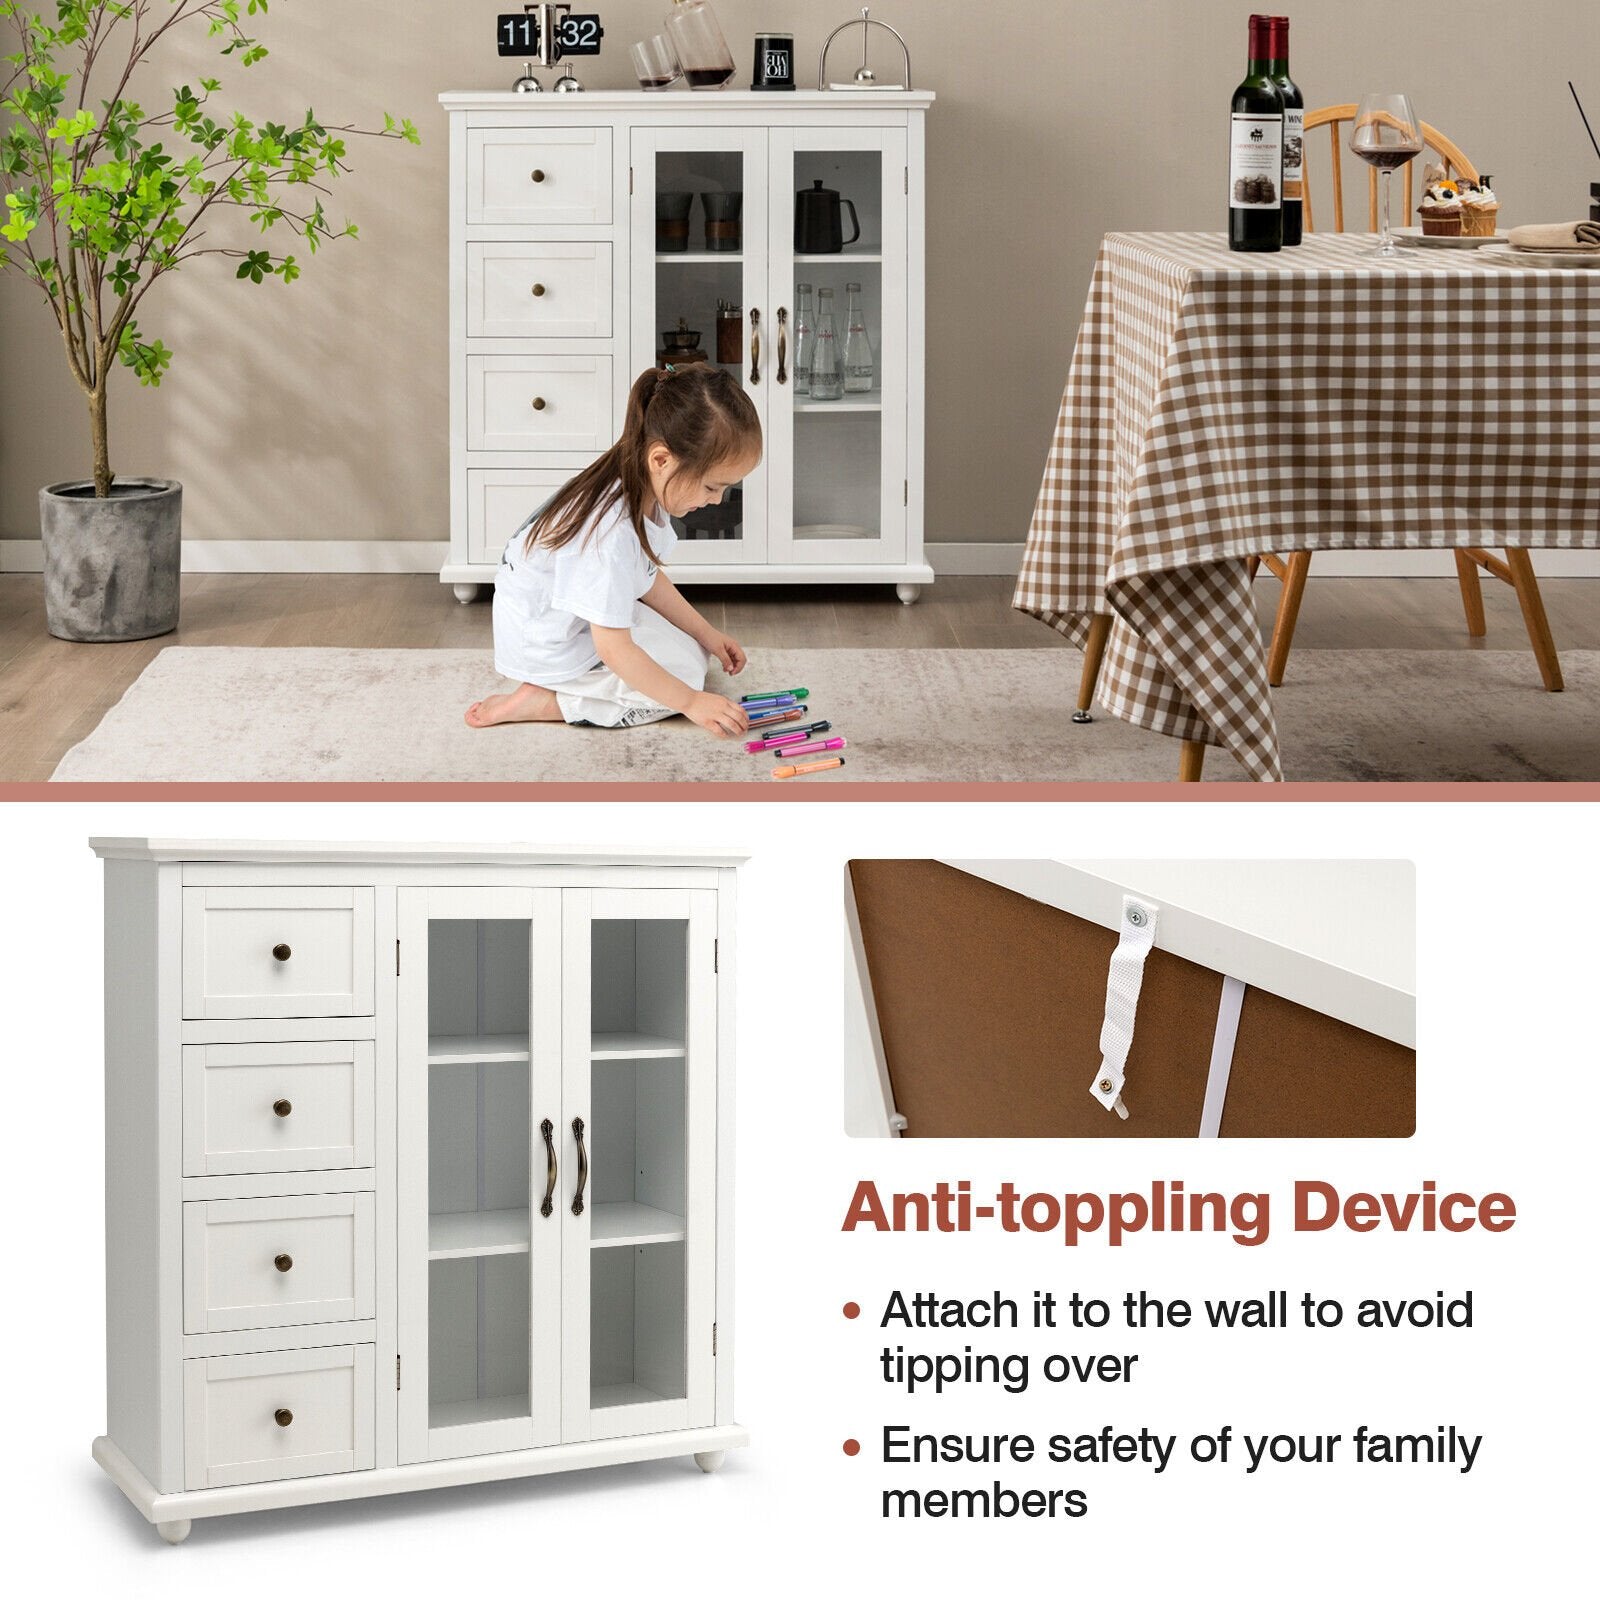 Buffet Sideboard Table Kitchen Storage Cabinet with Drawers and Doors, White - Gallery Canada